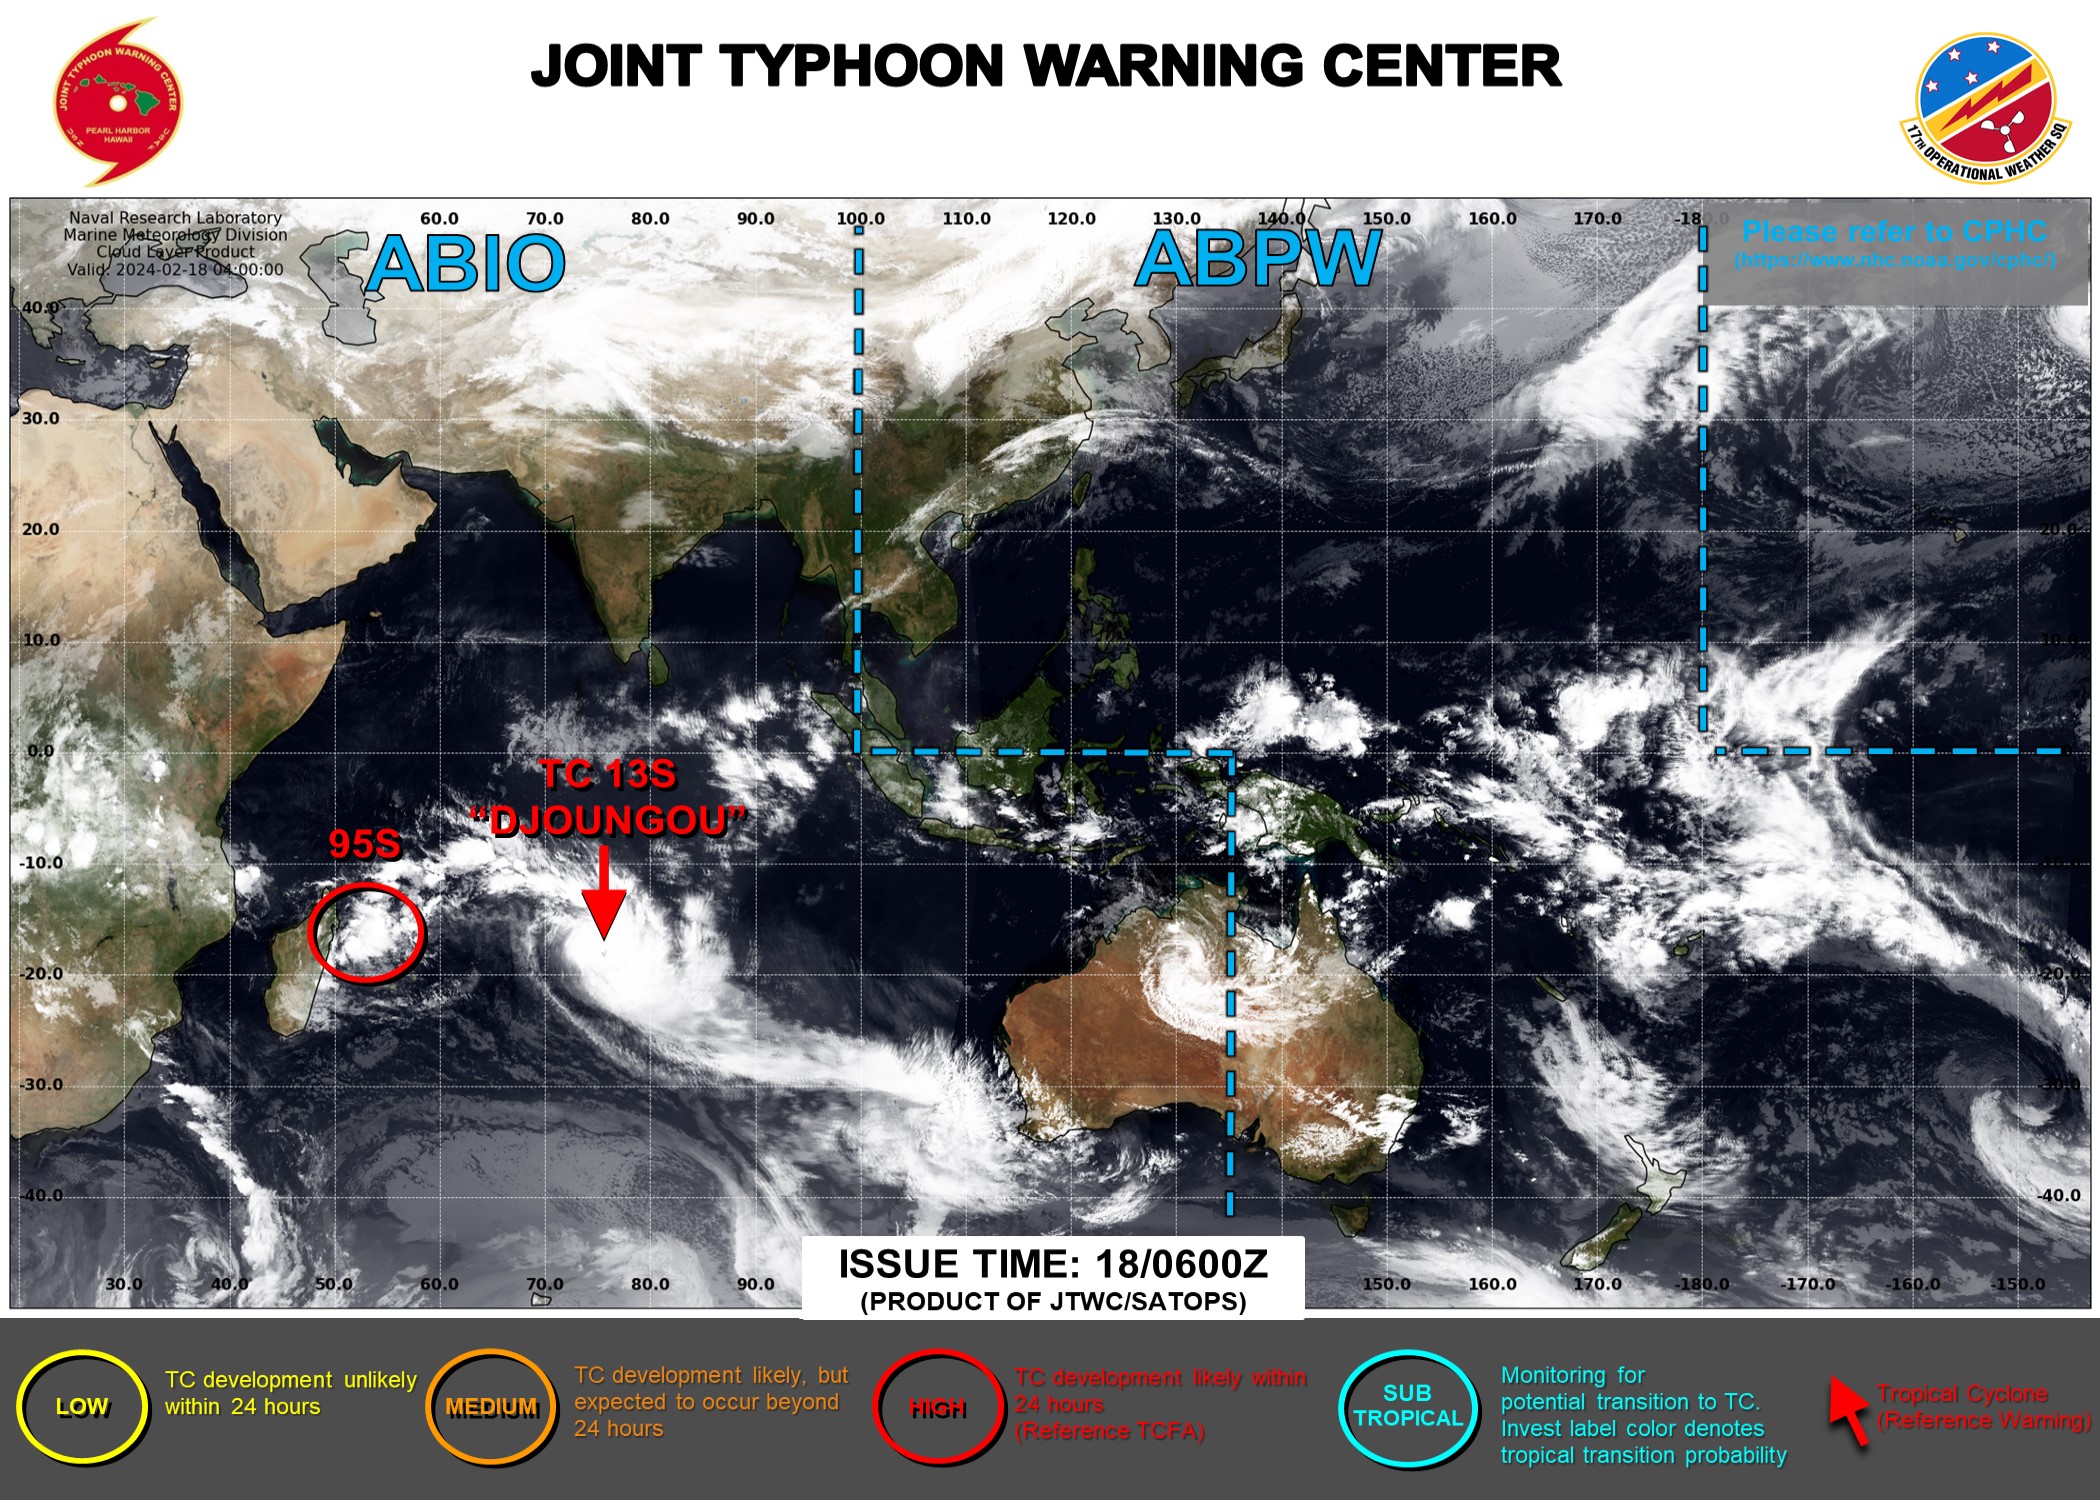 JTWC IS ISSUING 12HOURLY WARNINGS AND 3HOURLY SATELLITE BULLETINS ON TC 13S. 3HOURLY SATELLITE BULLETINS ARE ISSUED ON INVEST 95S, ON THE REMNANTS OF SUBTROPICAL 15P AND ON THE OVERLAND REMNANTS OF TC 14P.